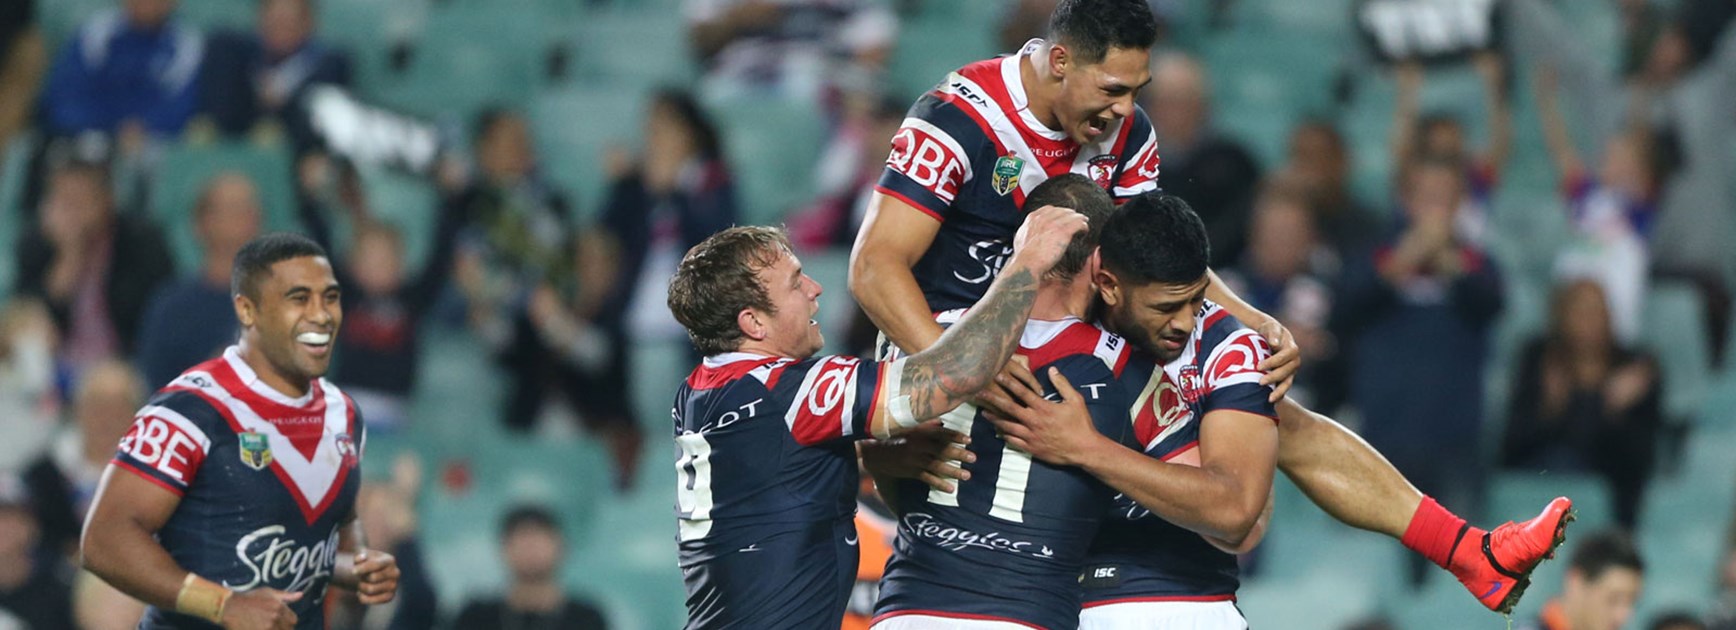 Roosters players celebrate during their Round 9 win over Wests Tigers.